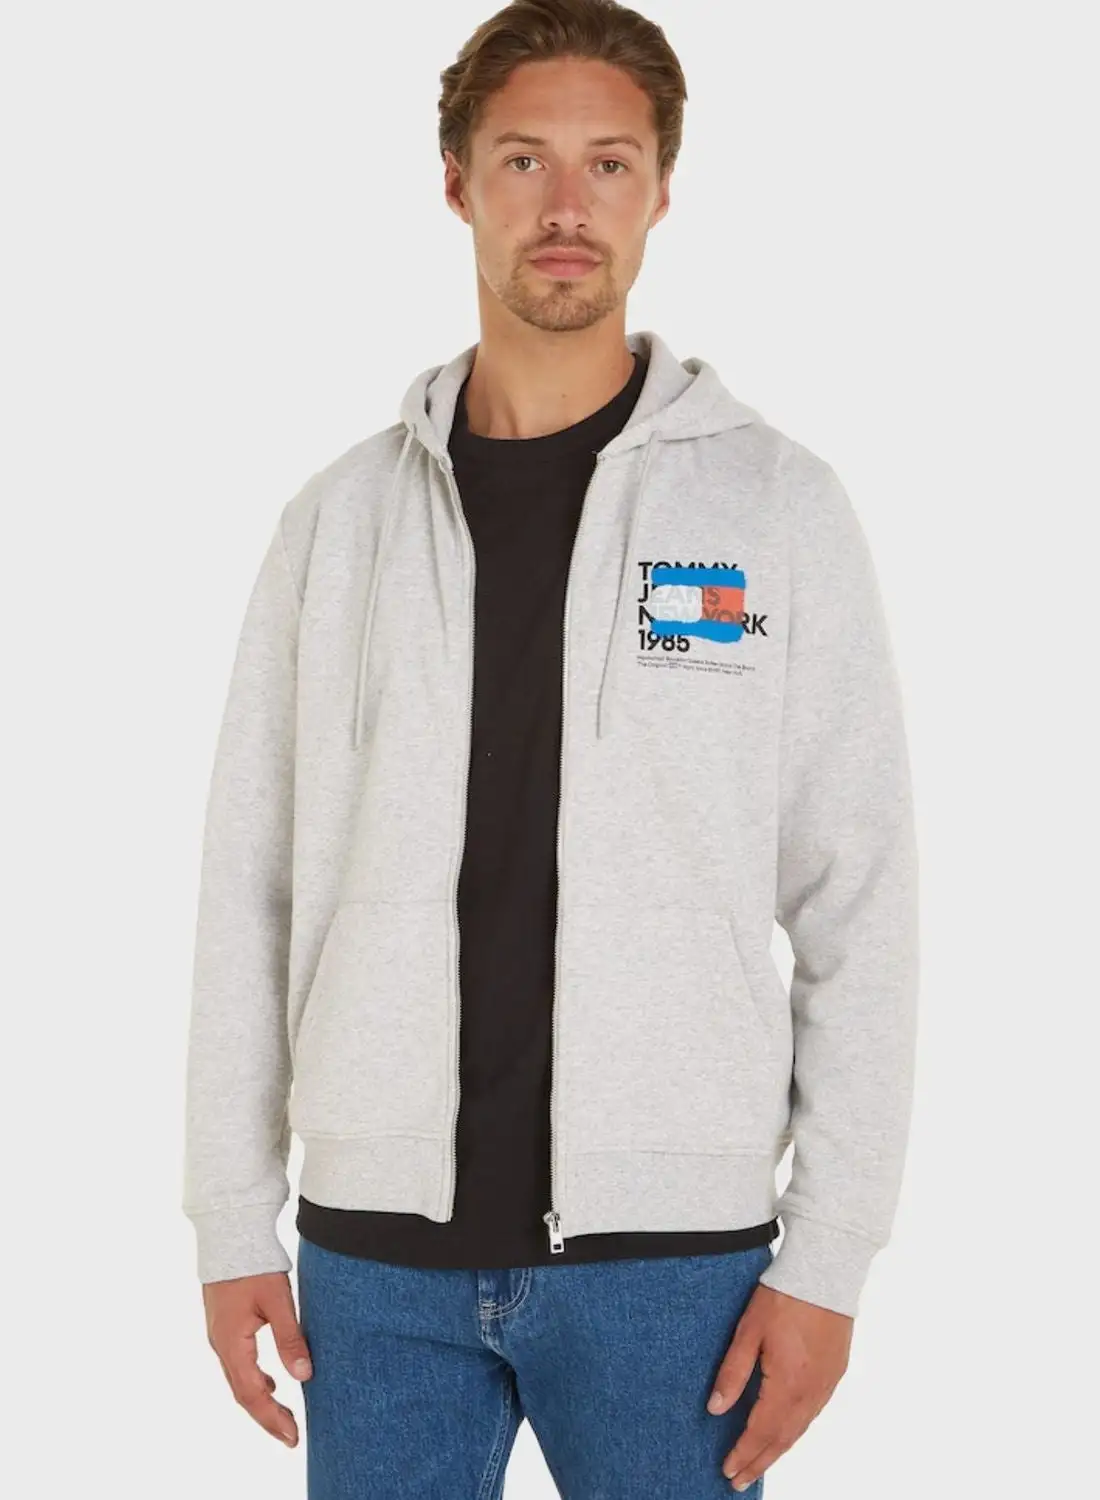 TOMMY JEANS Text Print Hoodie